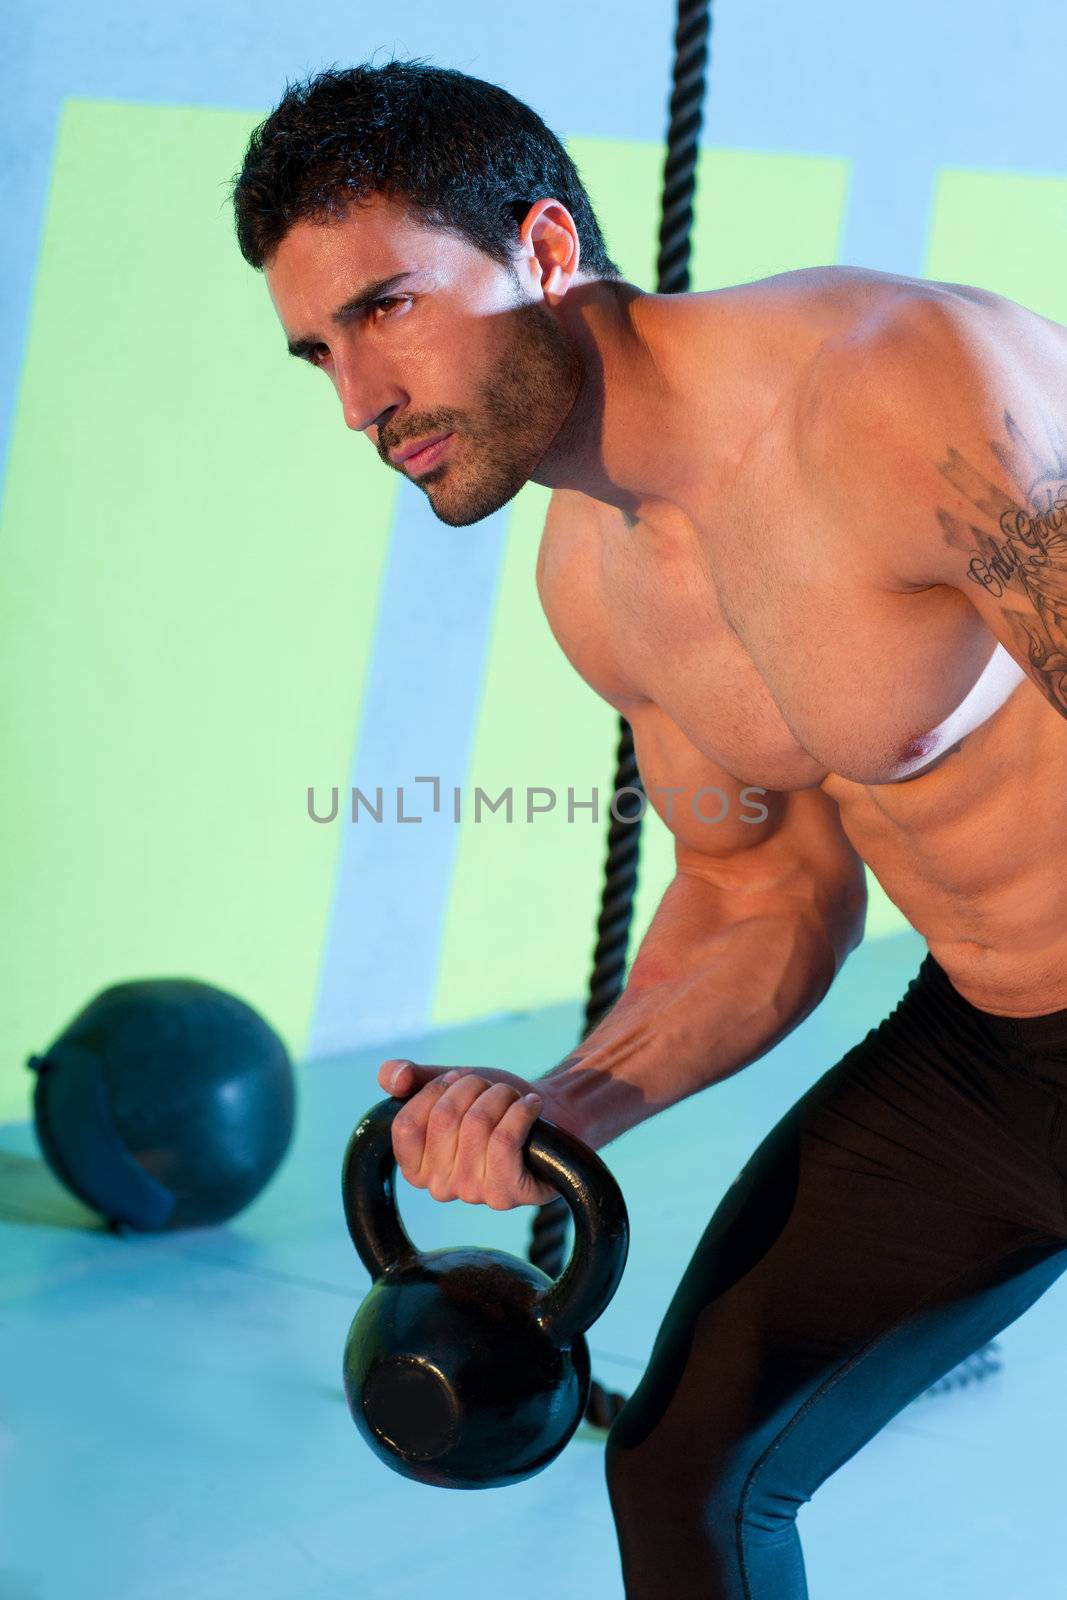 Crossfit man lifting kettlebell workout exercise at gym